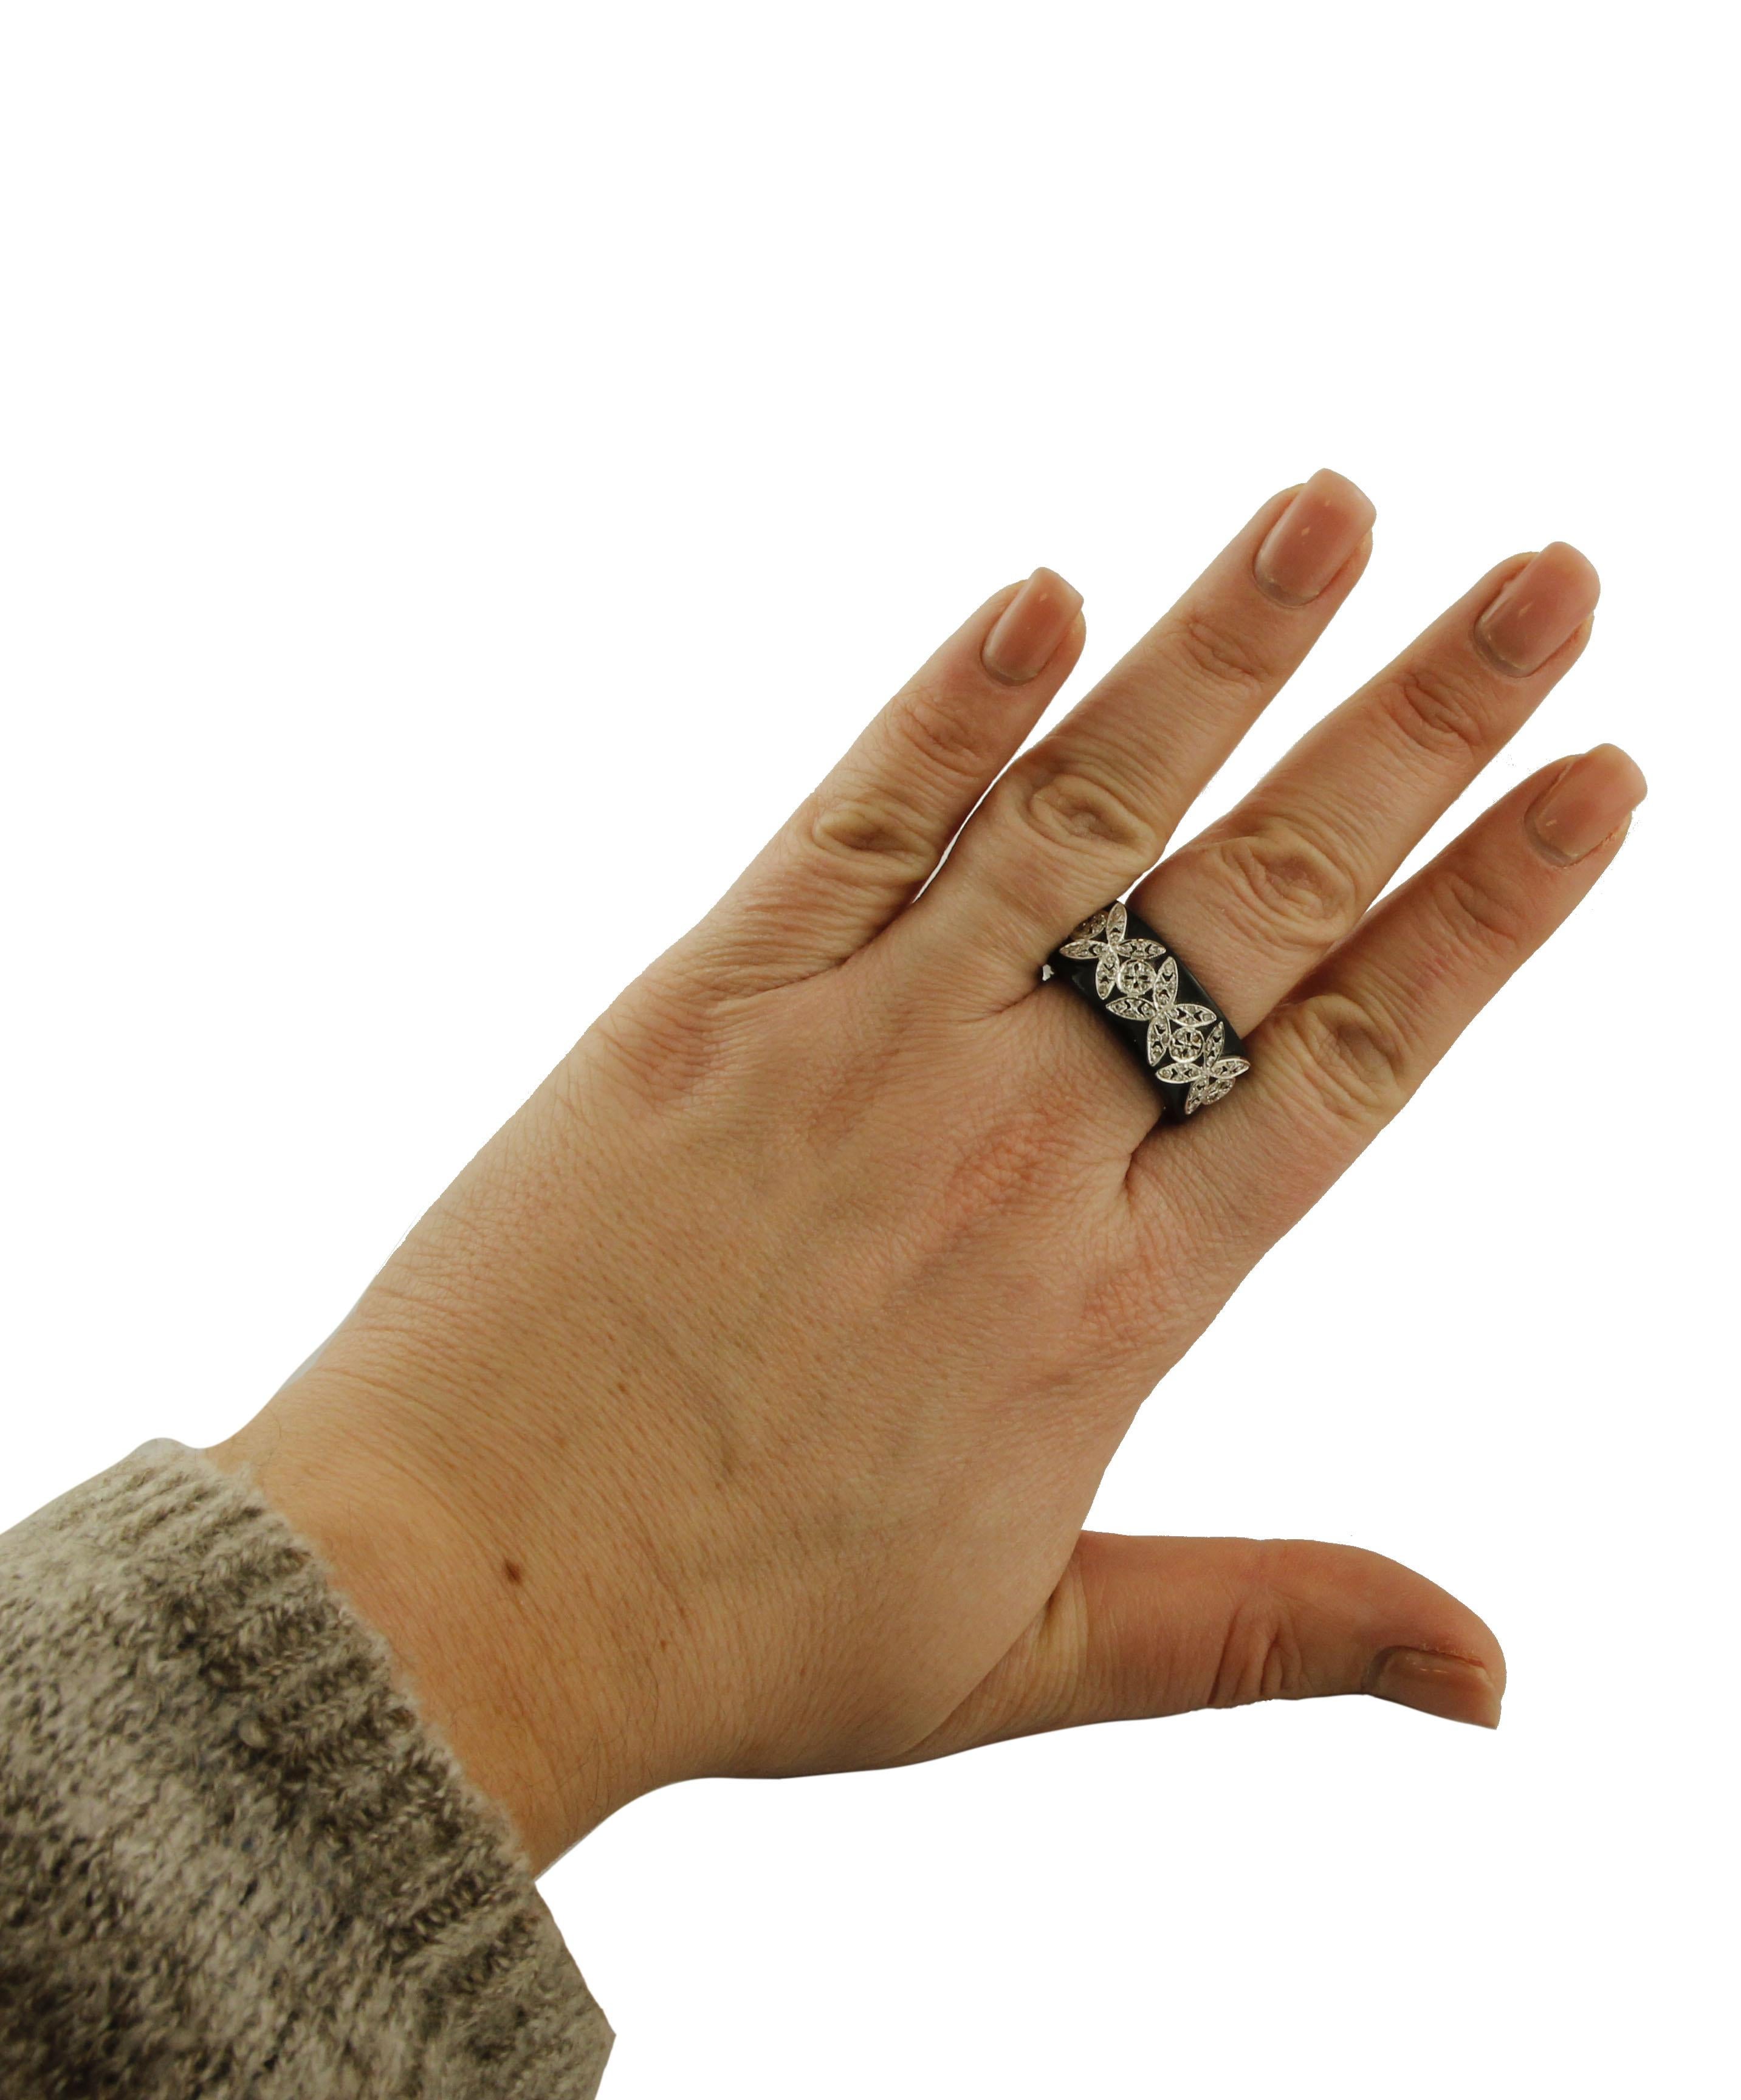 0.24 Diamonds, White Gold Butterfly Details, 5.9g Onyx Band Ring For Sale 1